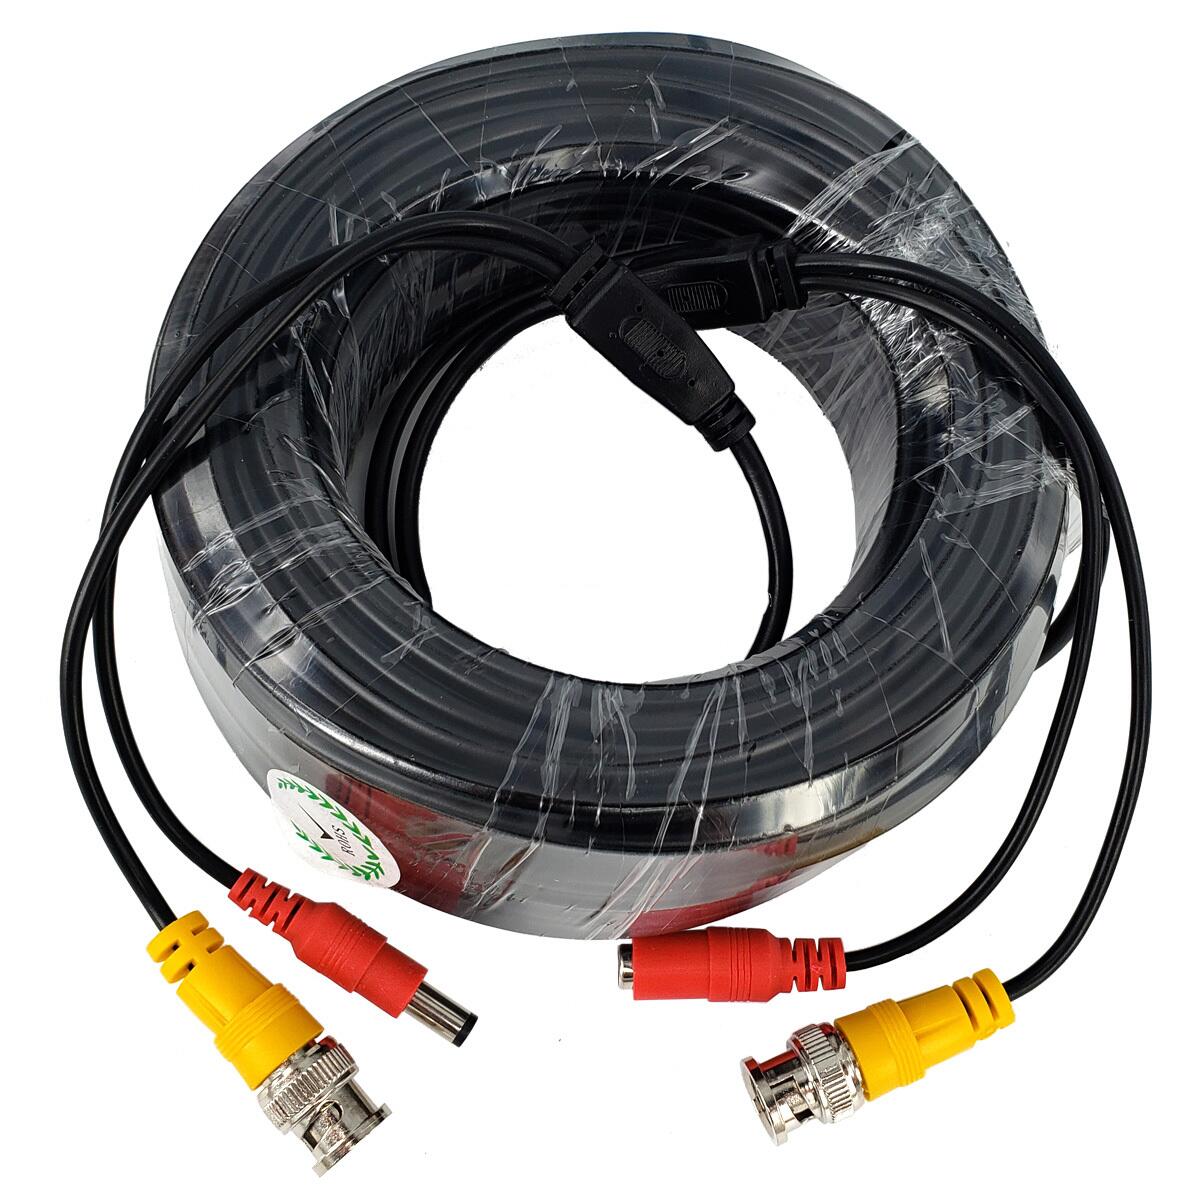 Analog camera DVR cable Featured Image